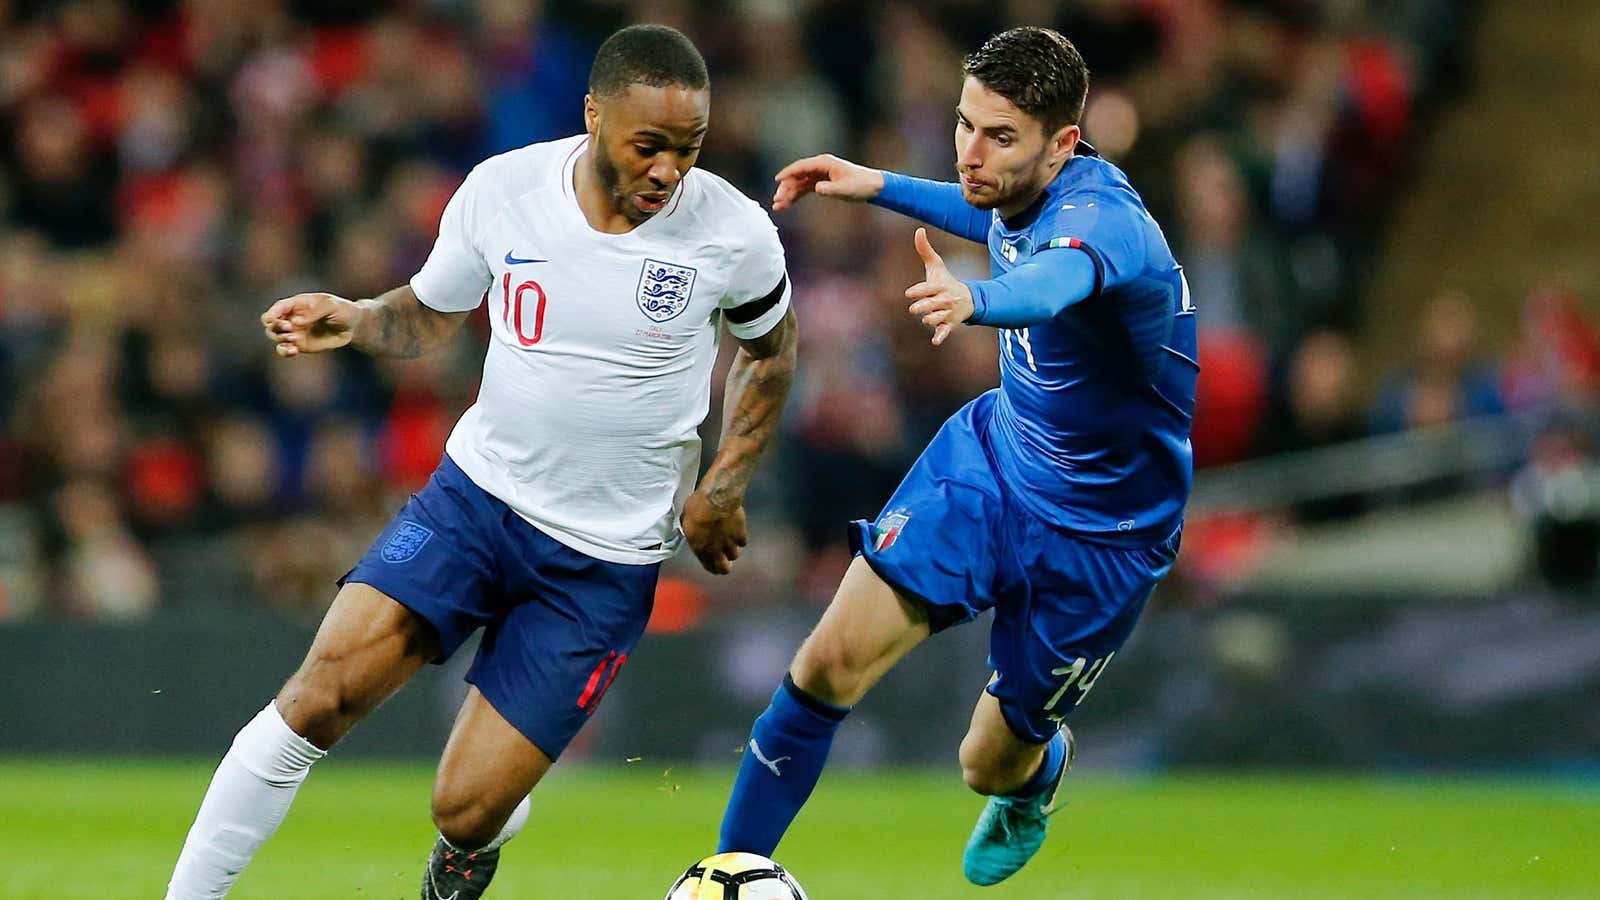 Raheem Sterling was one of the stars of the 2018 World Cup